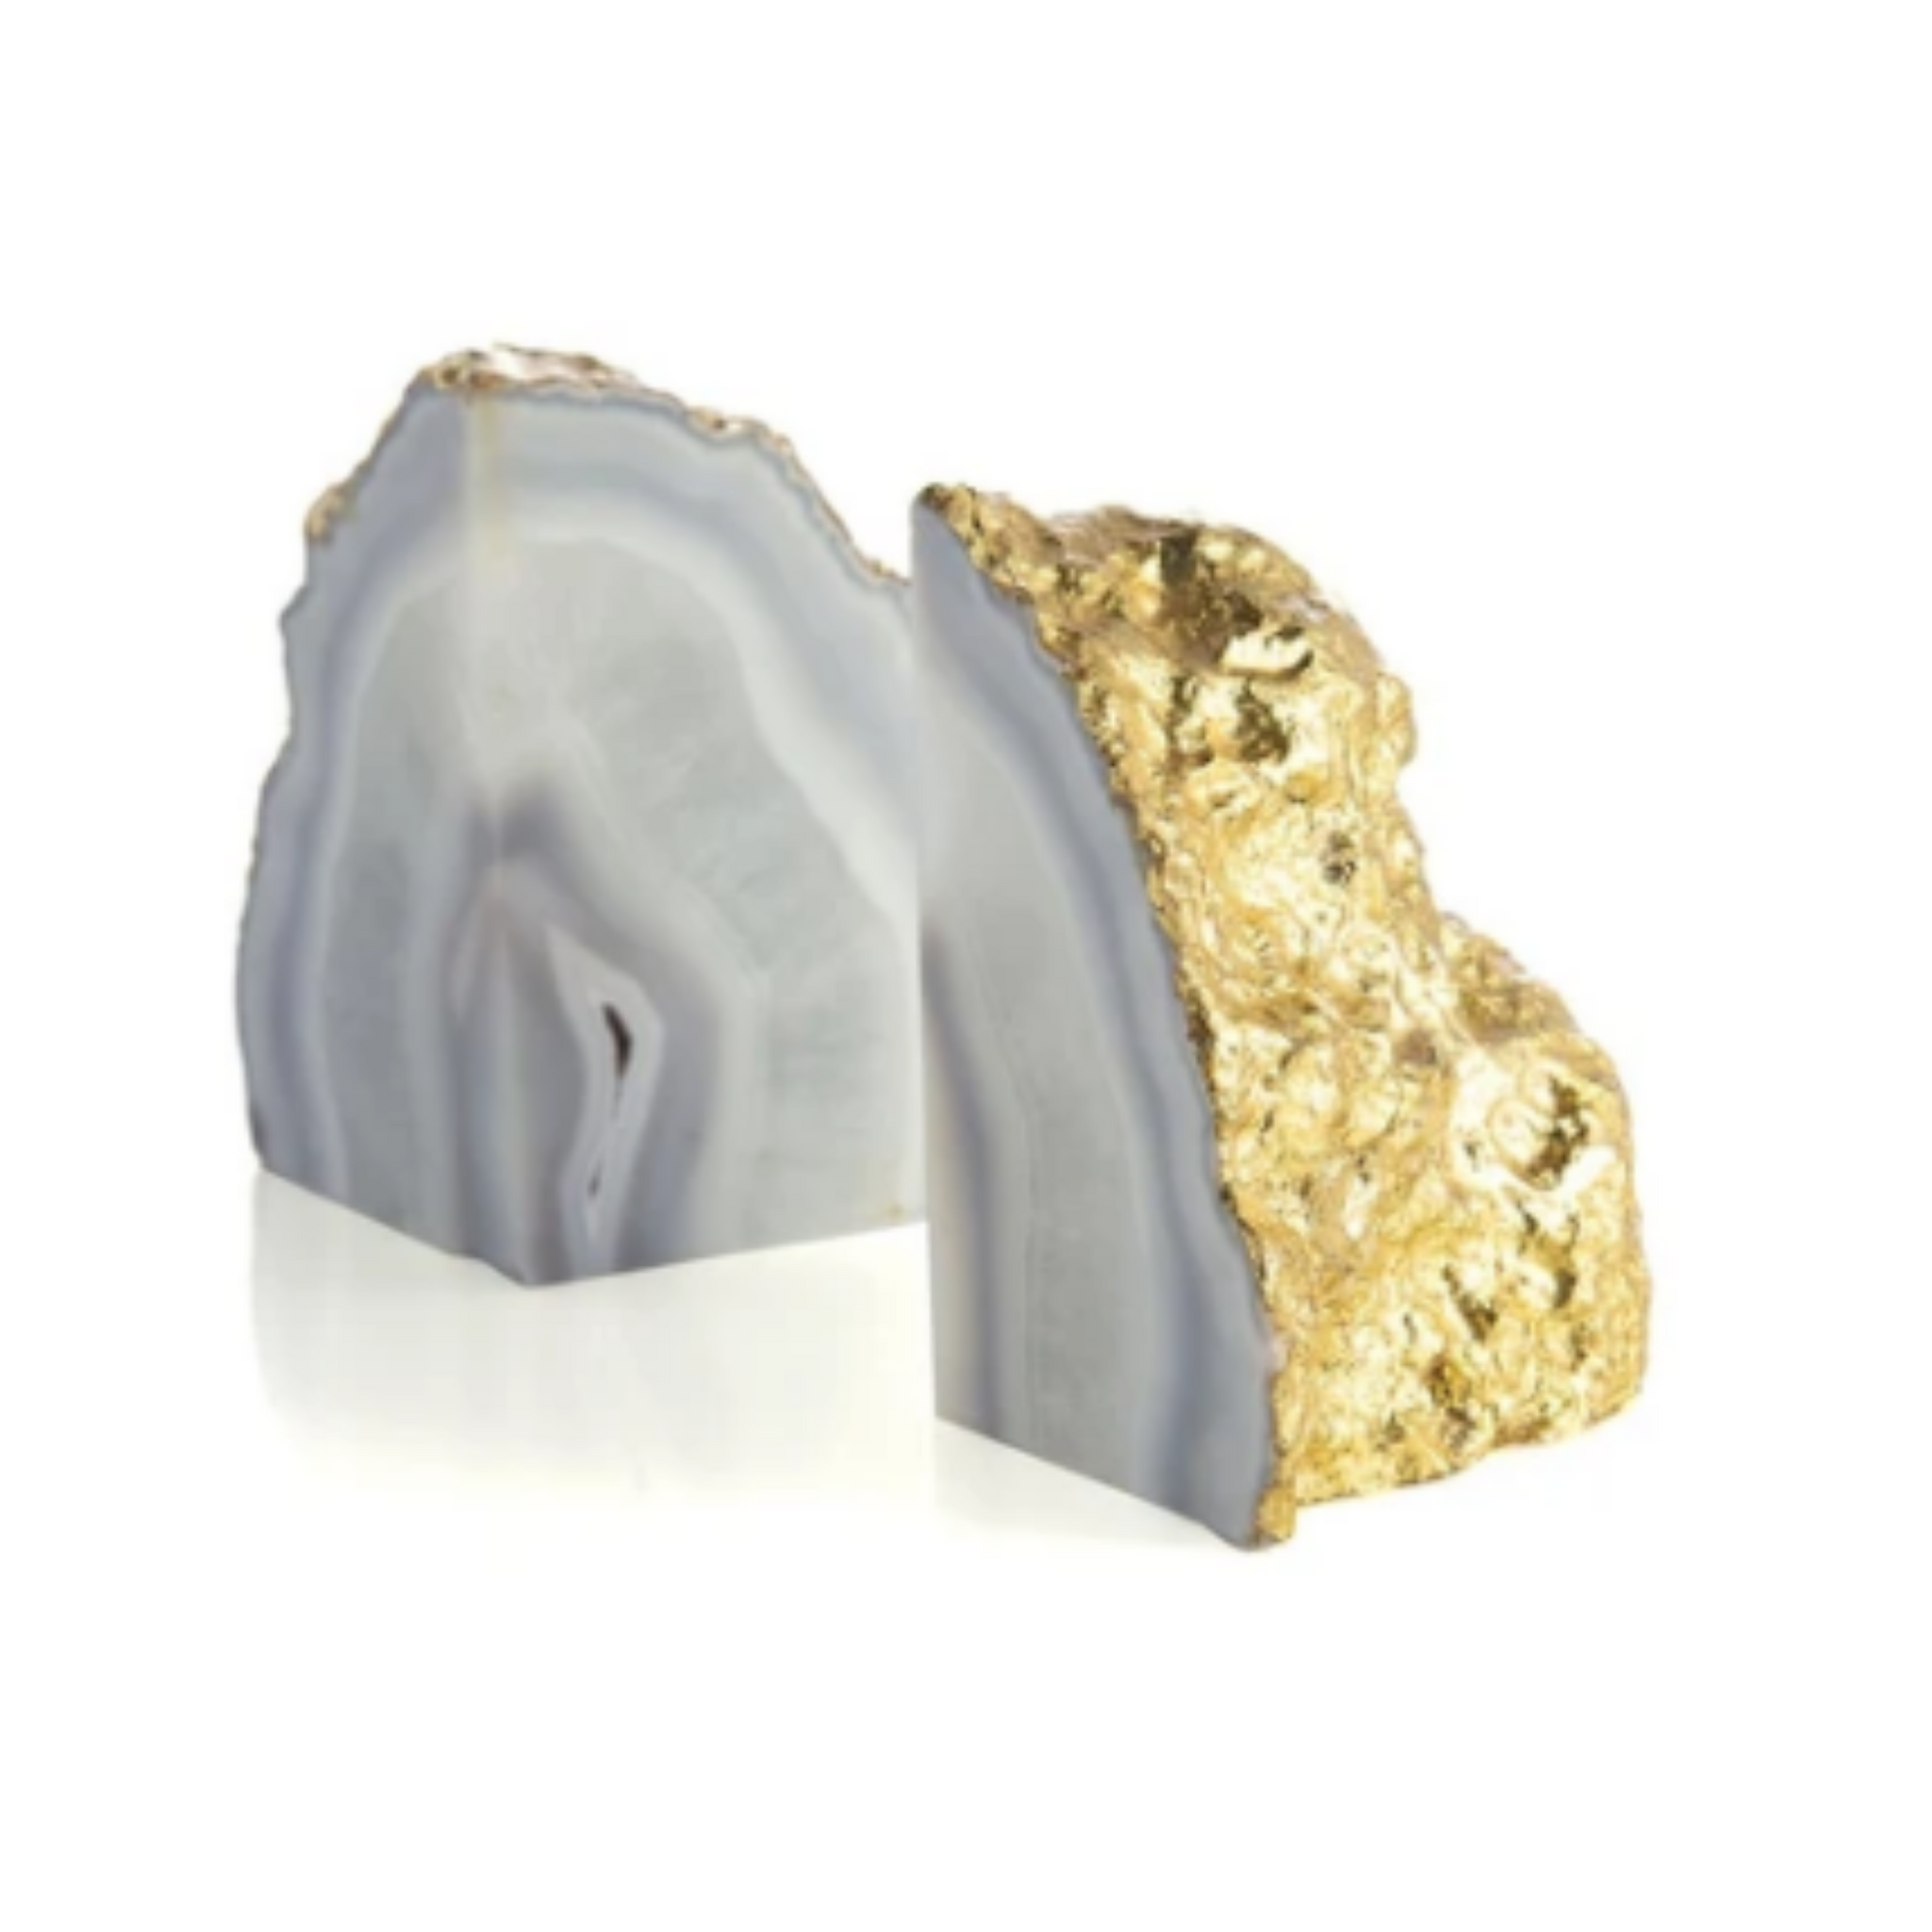 Agate Bookend (SOLD SEPARATELY)